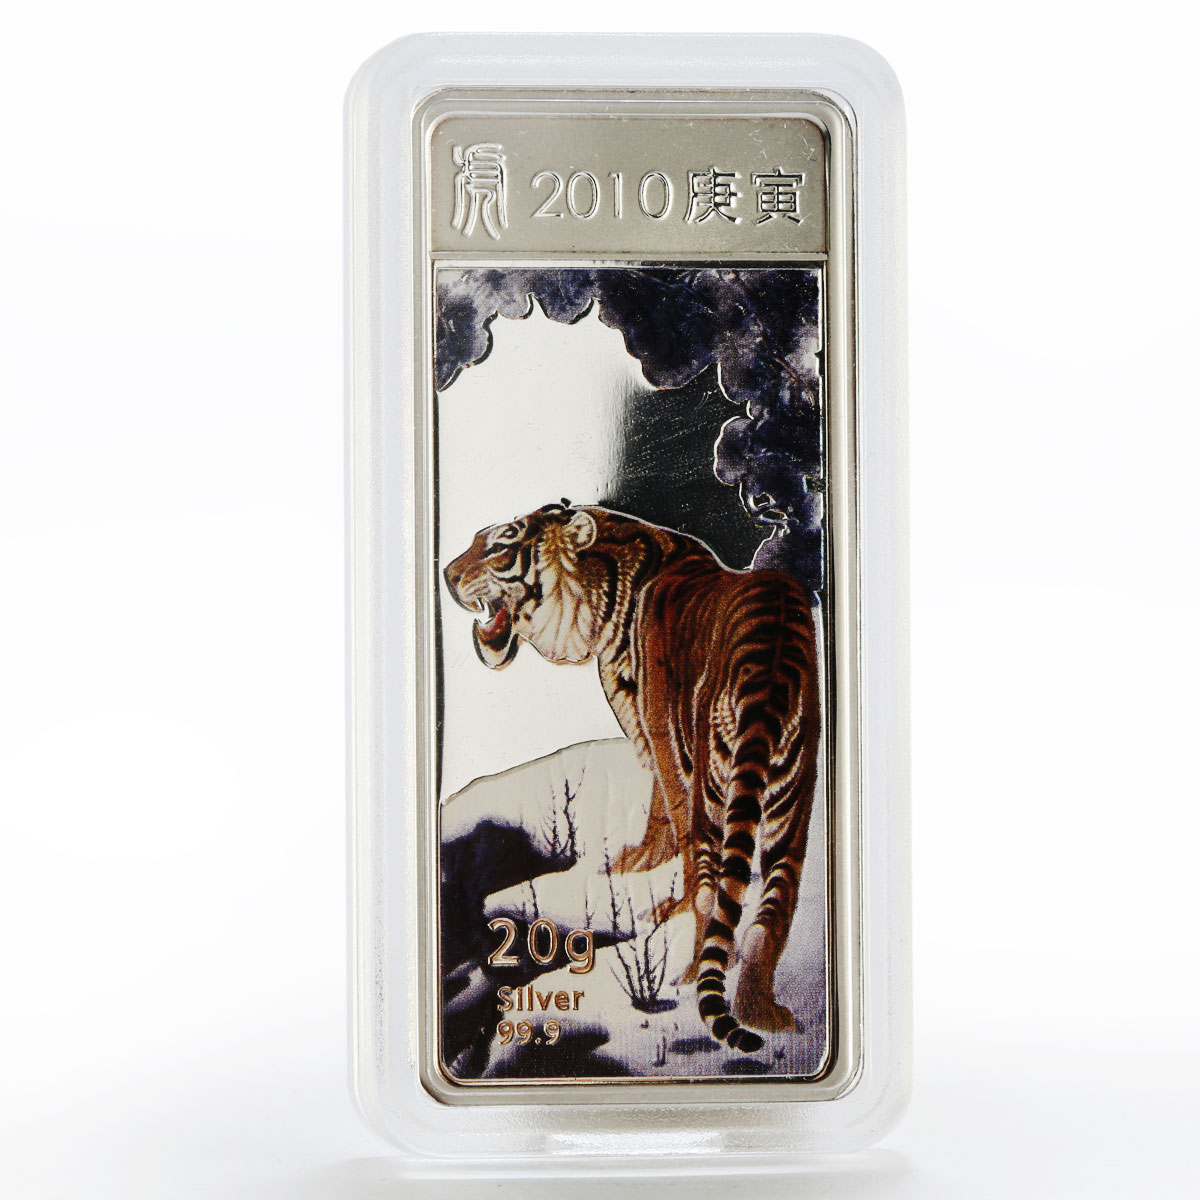 Liberia 5 dollars Year of the Tiger colored proof silver coin 2010